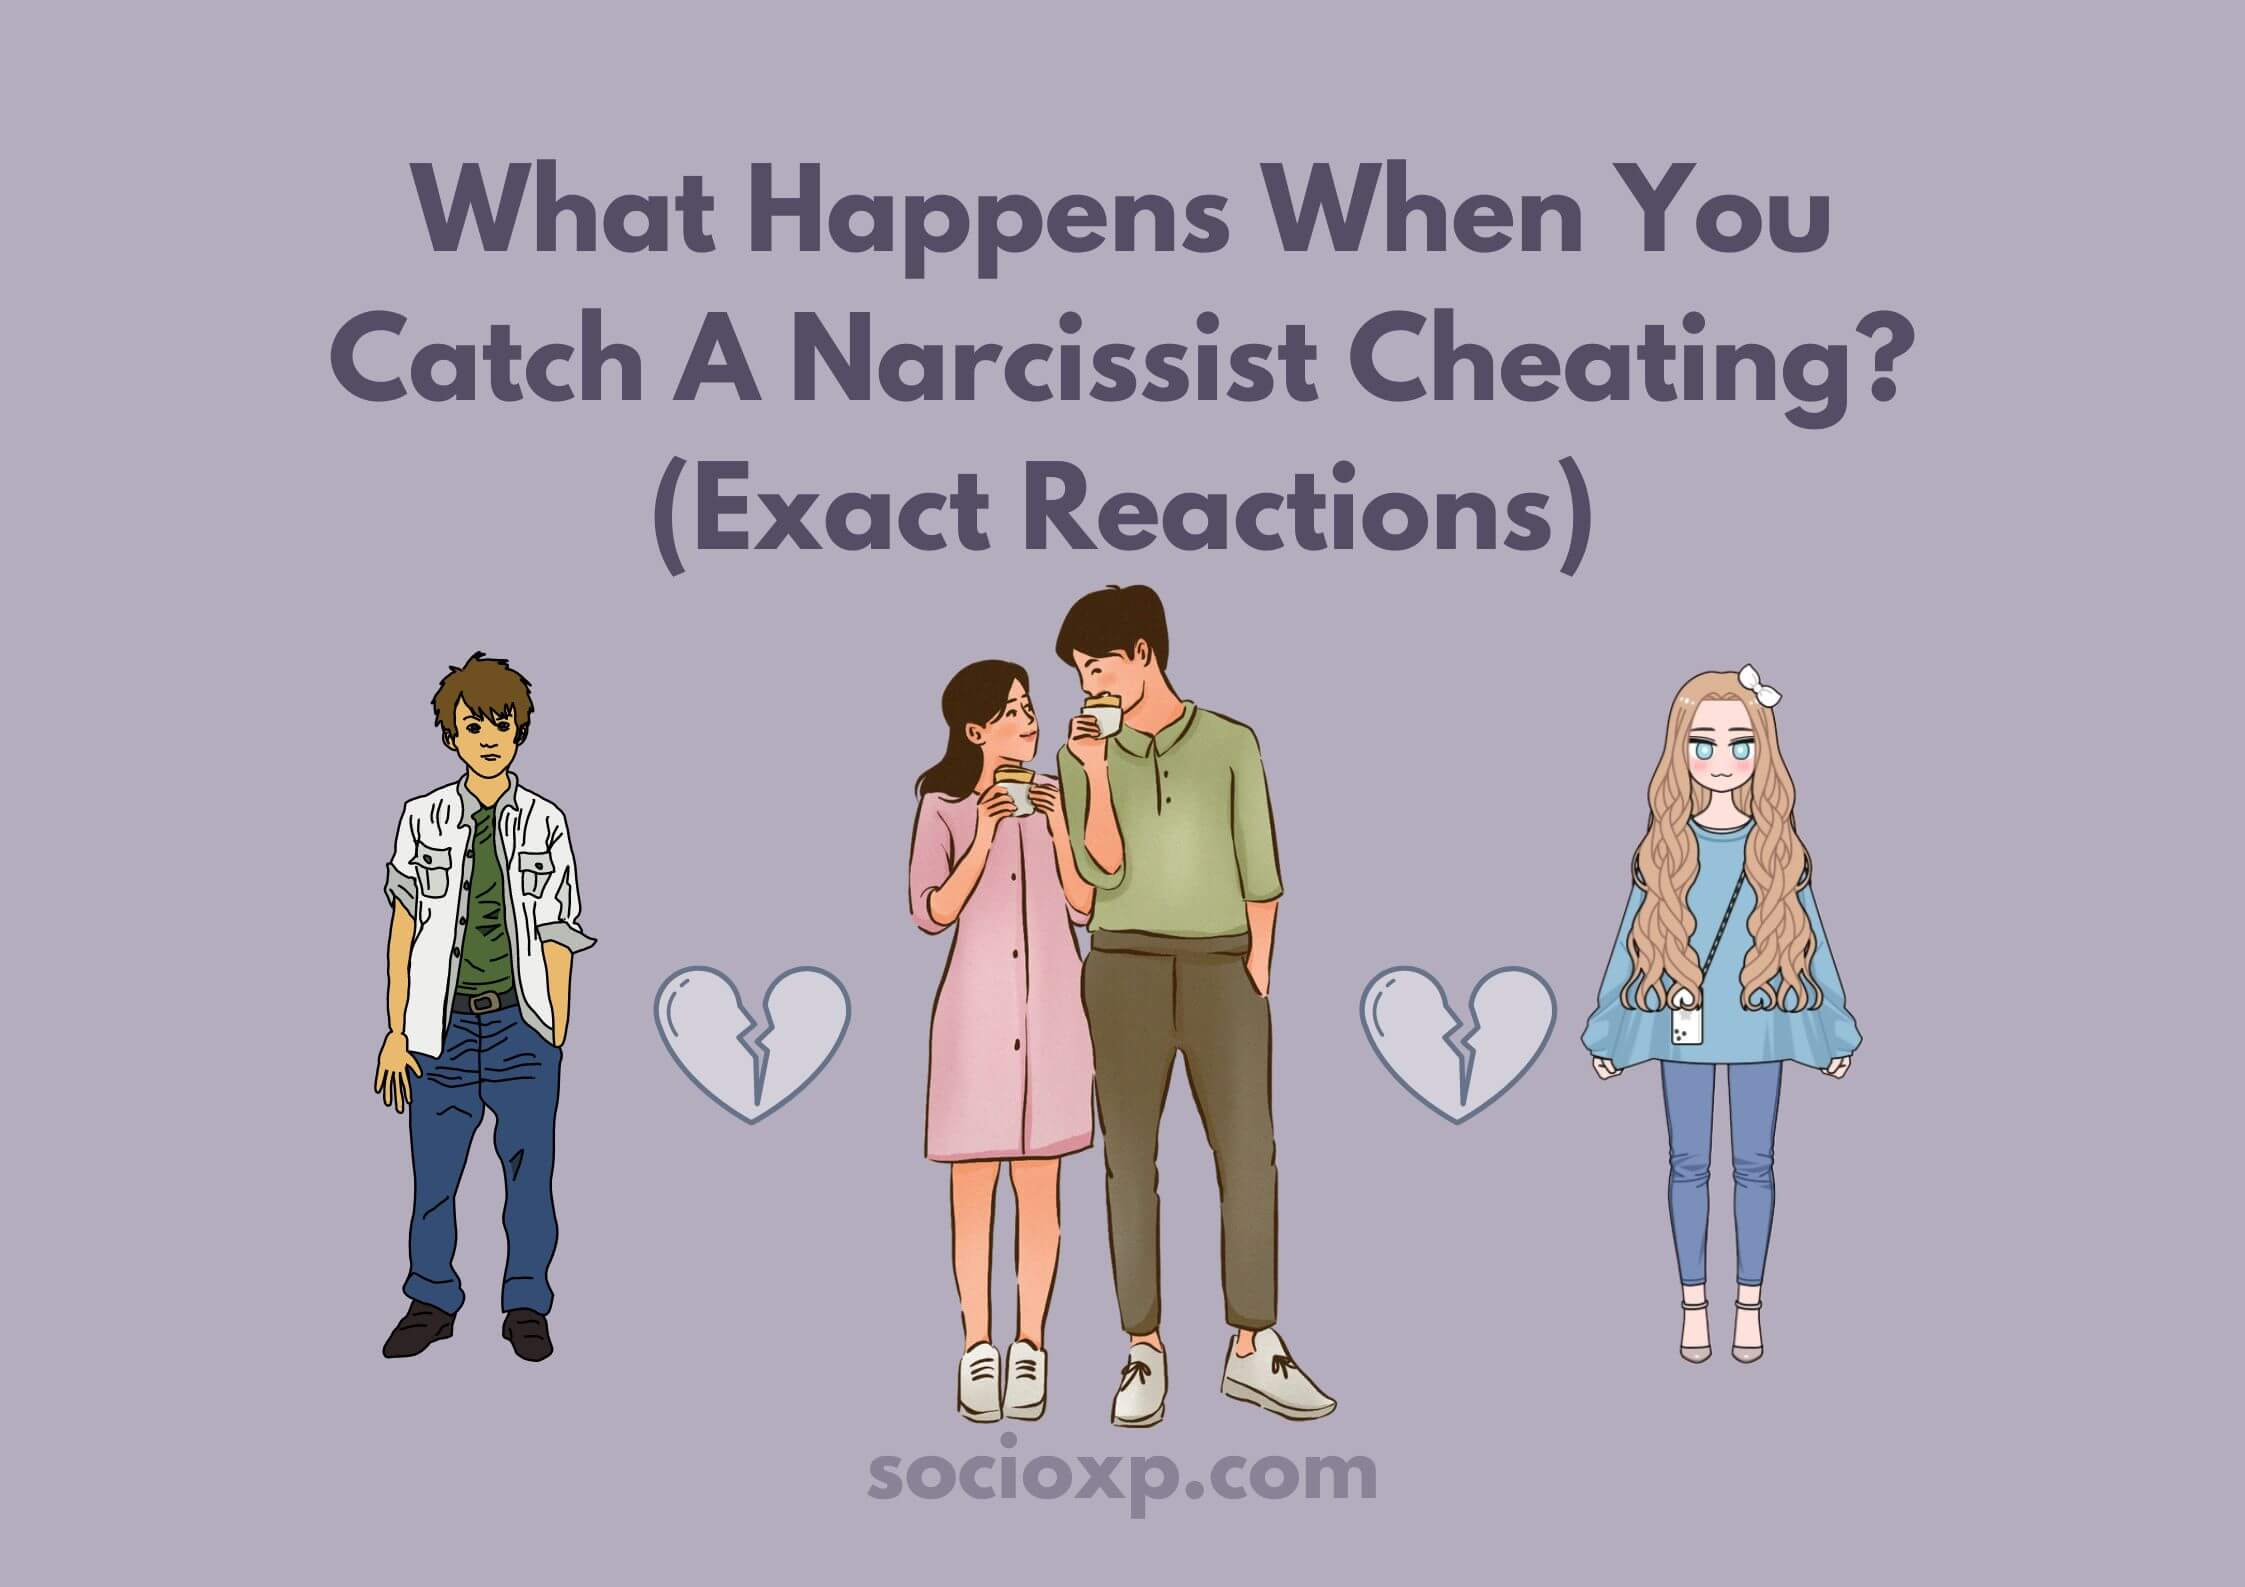 What Happens When You Catch A Narcissist Cheating? (Exact Reactions)